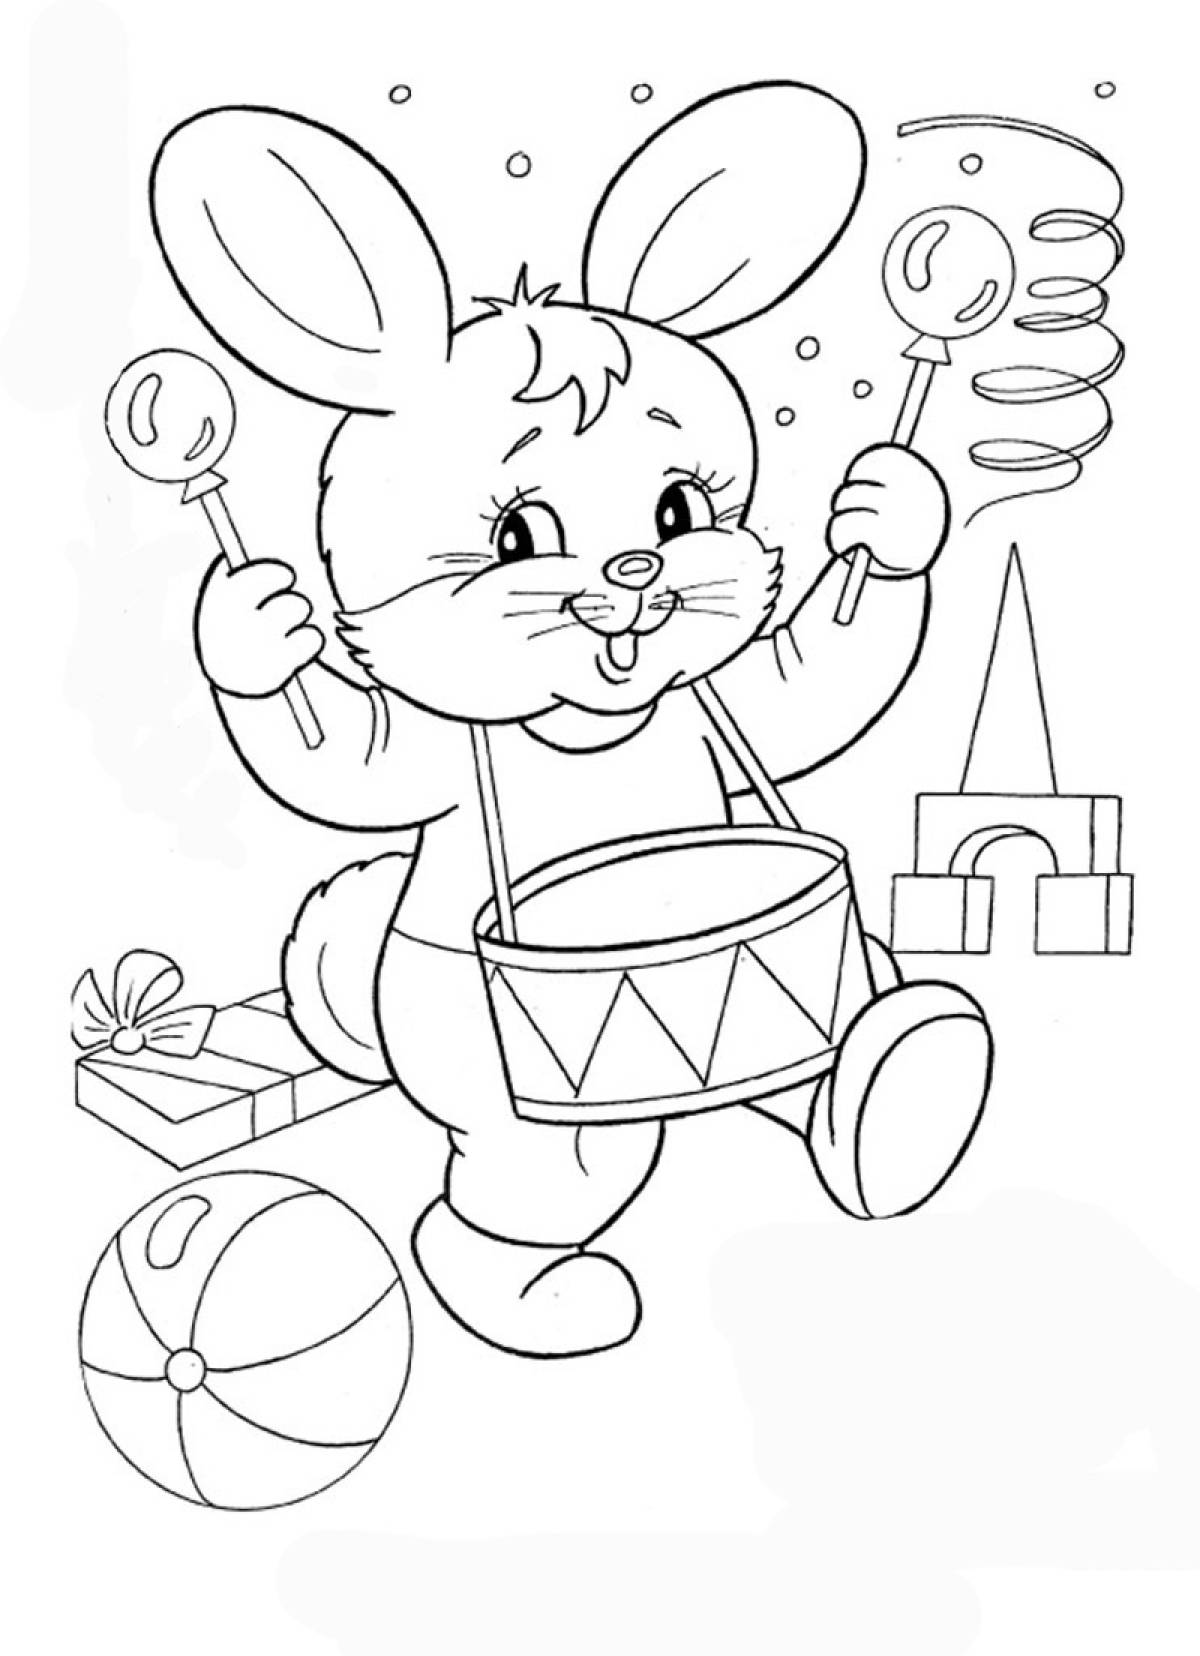 Bunny with a drum